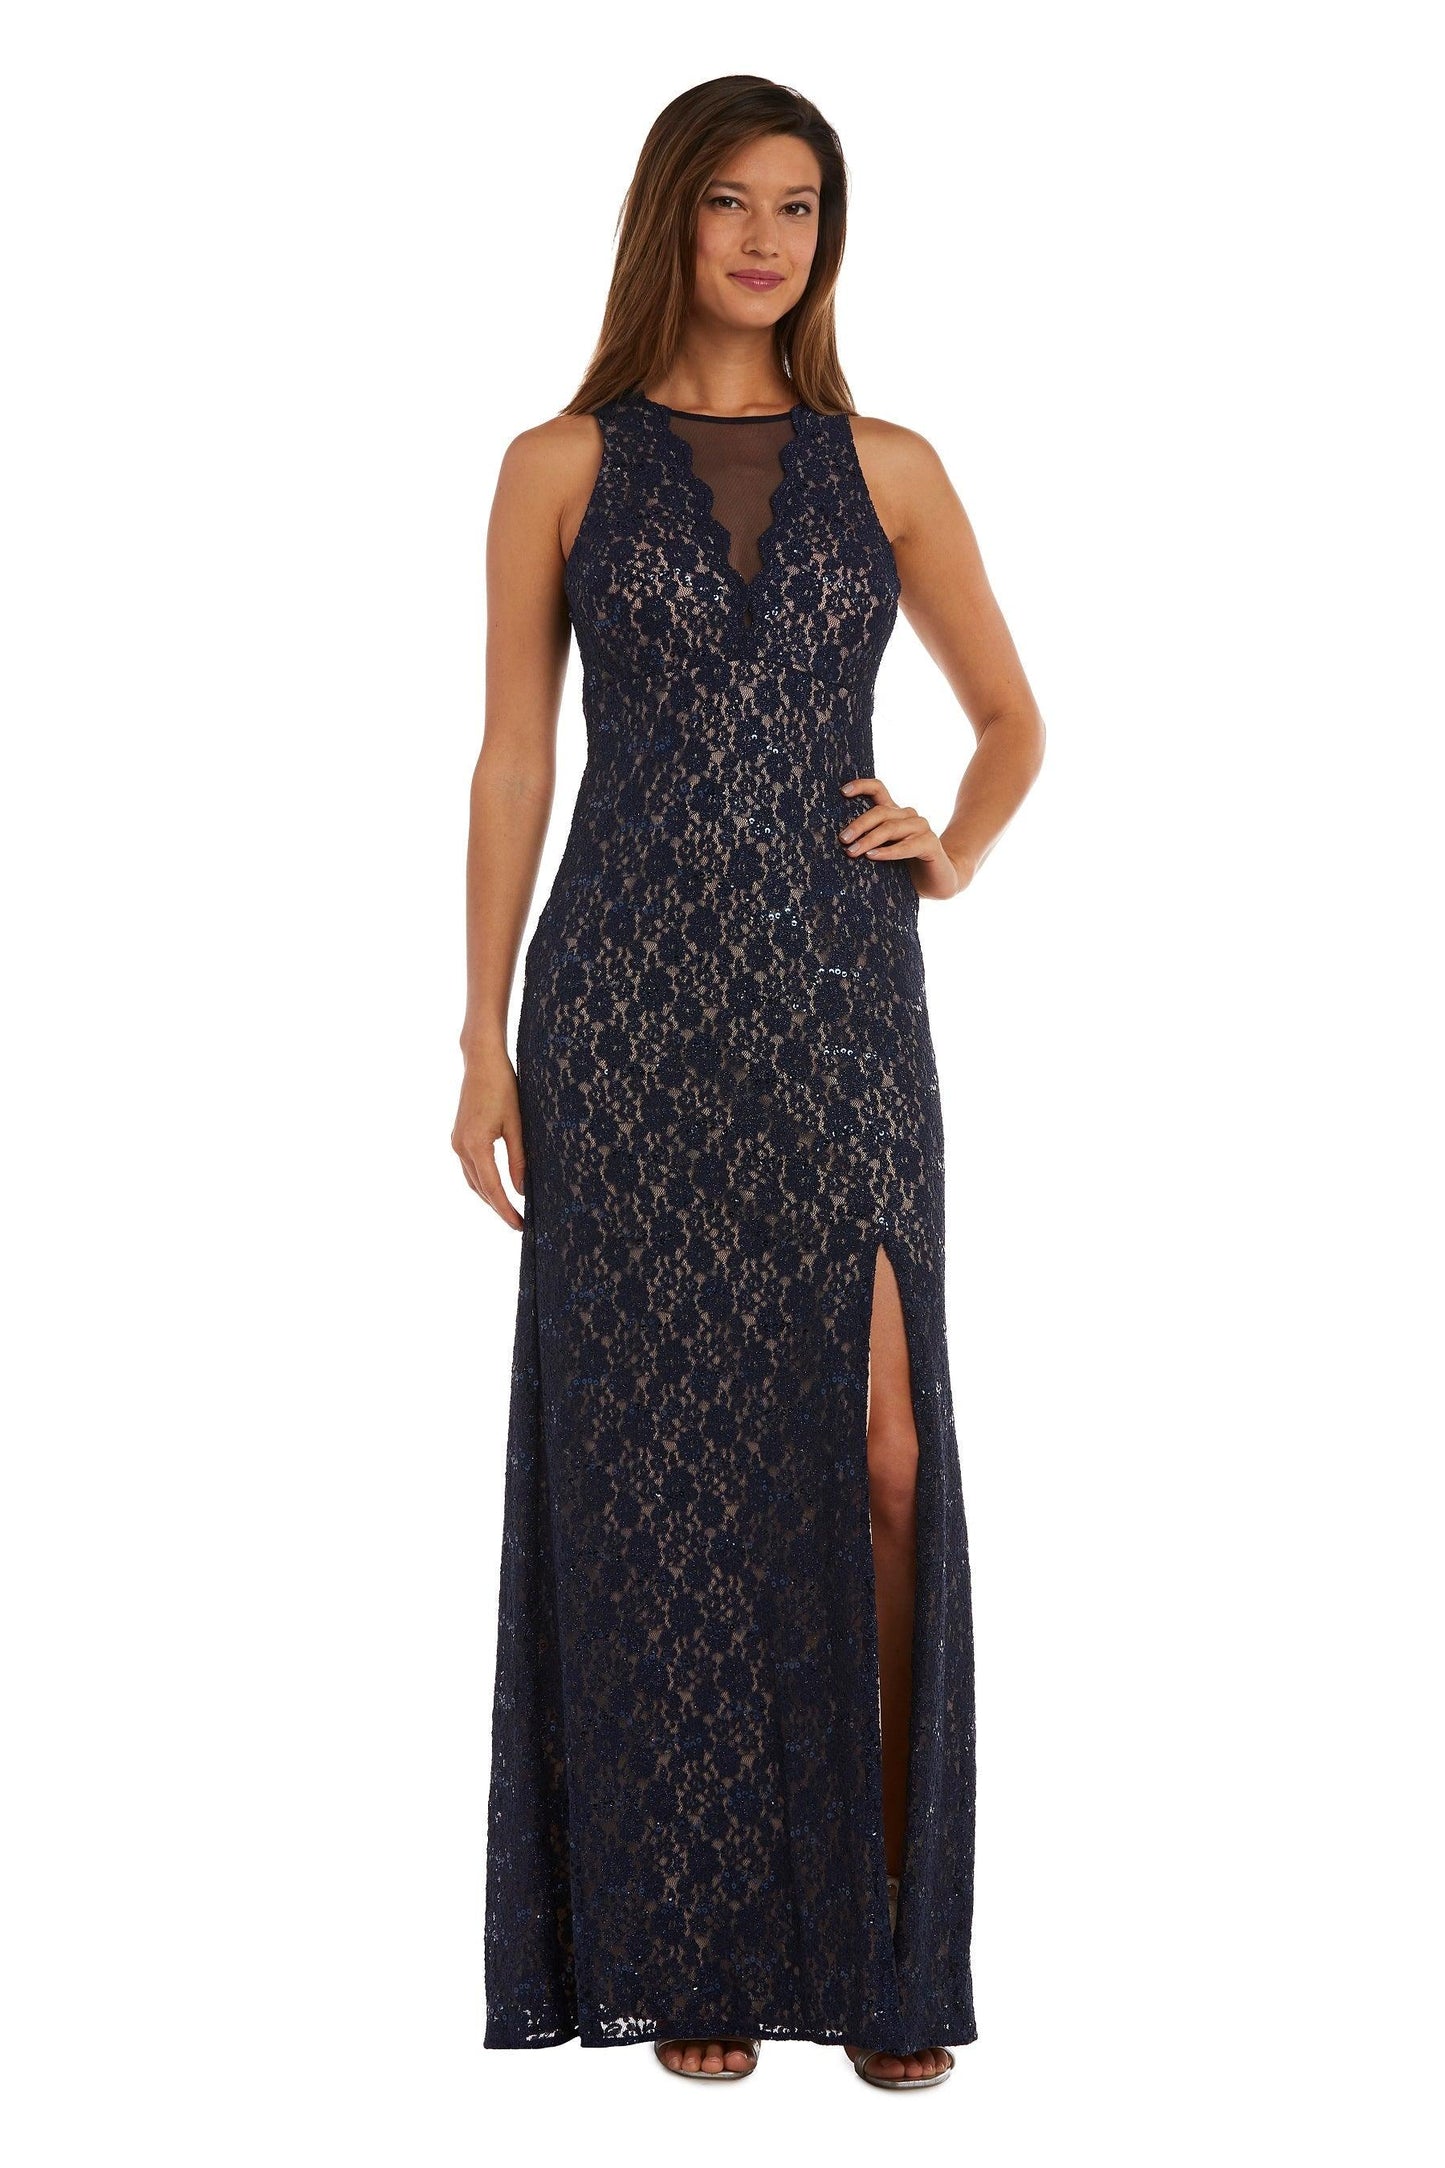 Nightway Long Formal Glitter Lace Petite Gown 21547P - The Dress Outlet